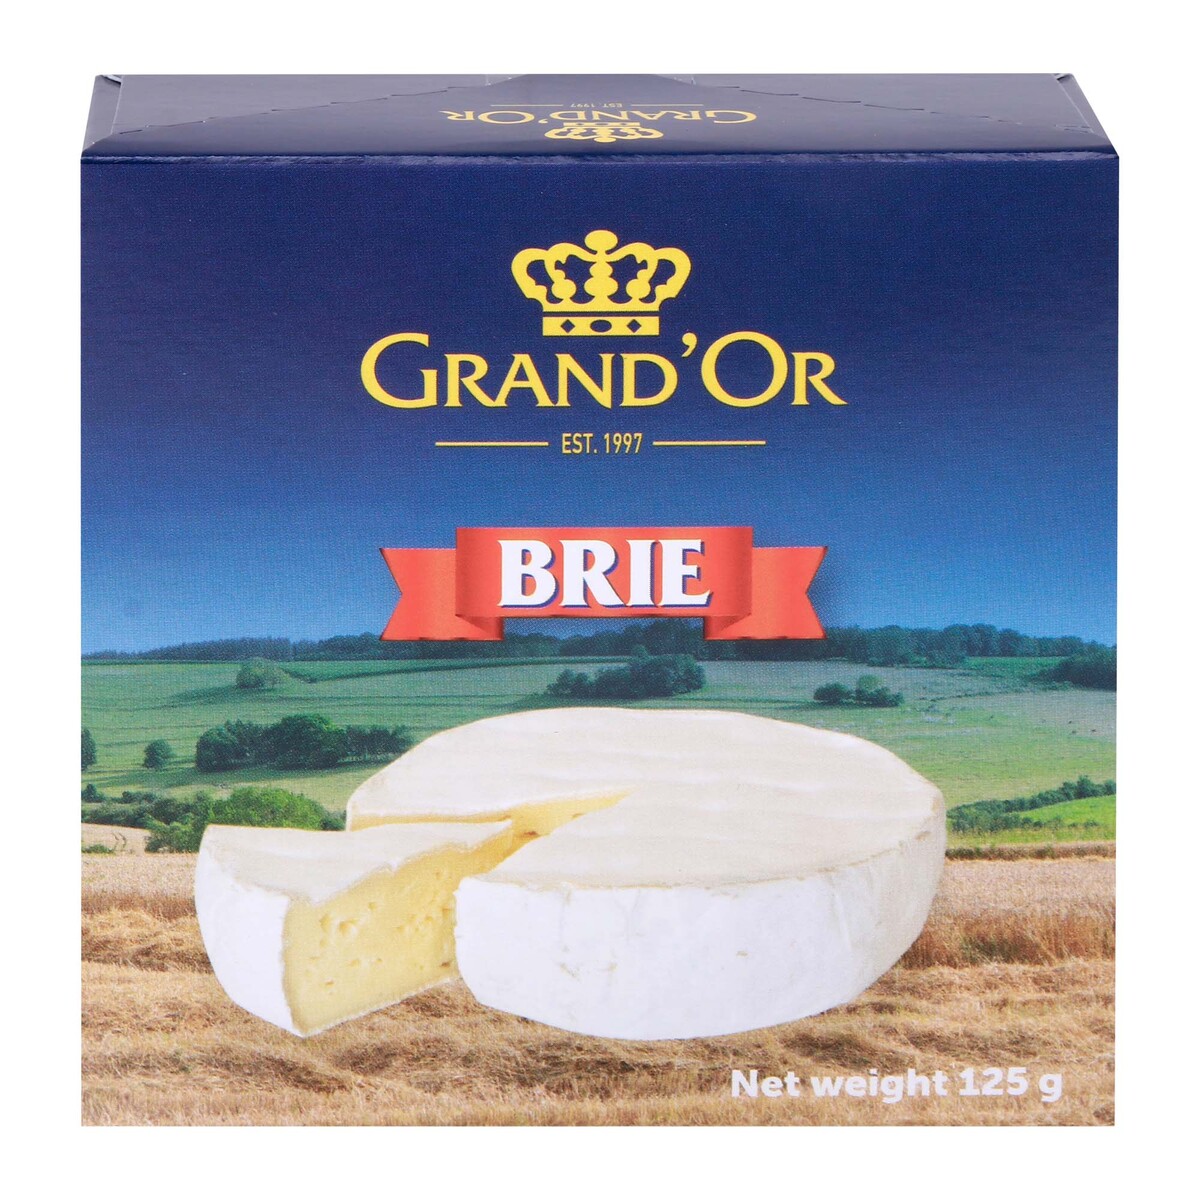 Grand'Or Brie Cheese, 125 g